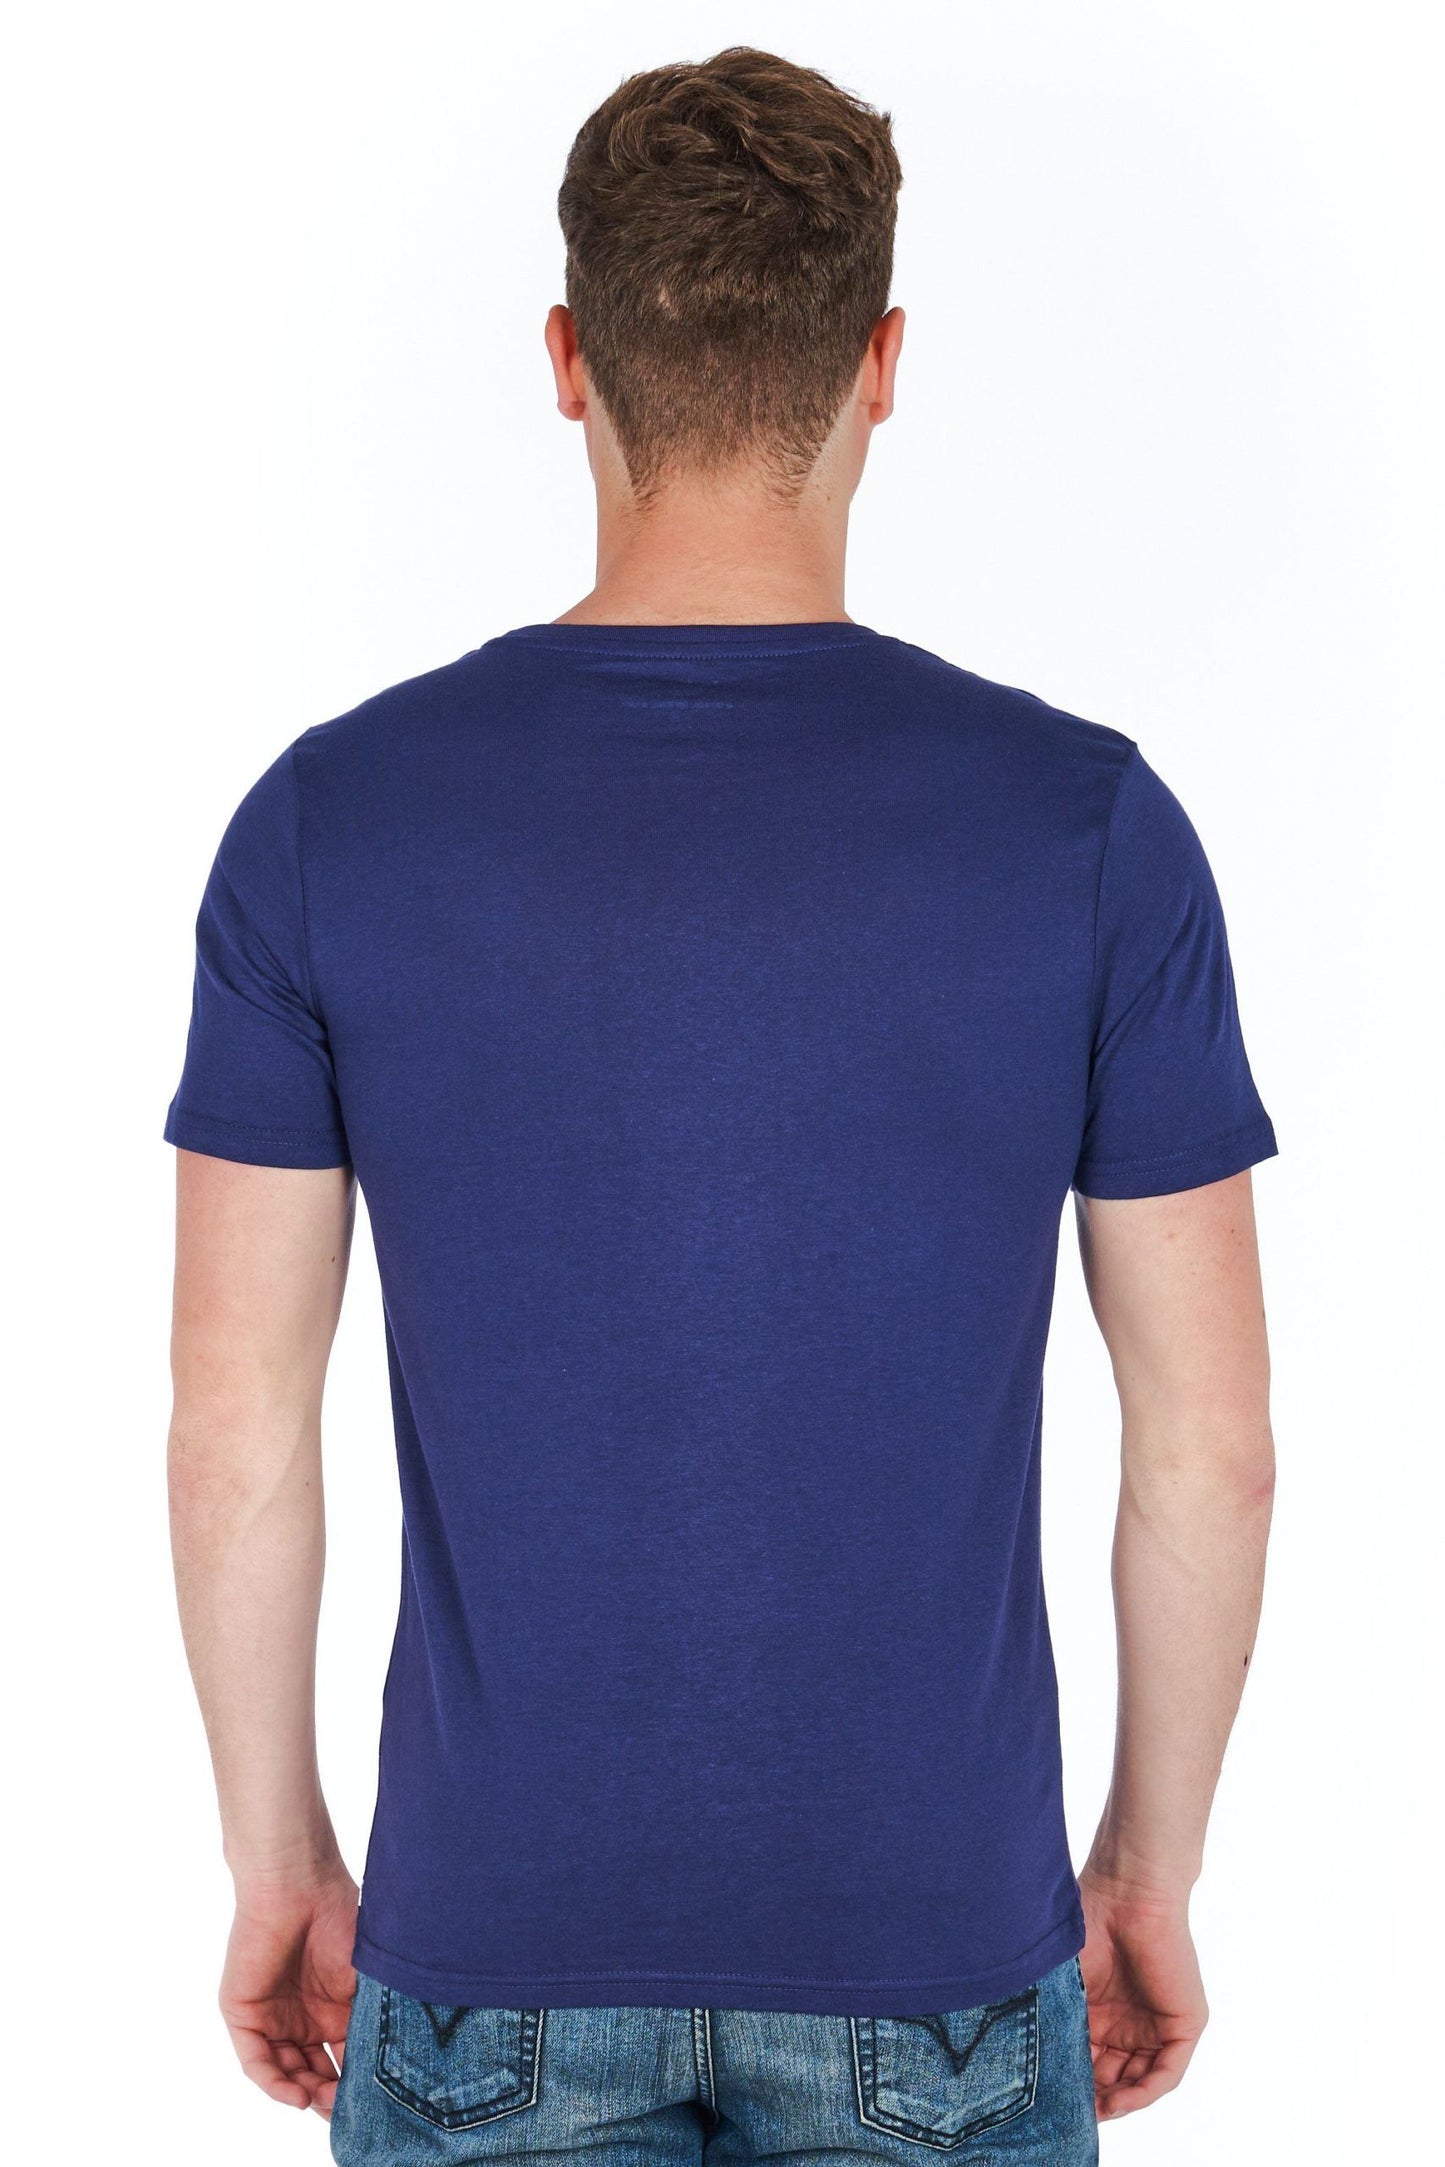 Chic Slim-Fit Jersey Tee with Mini Logo Accent